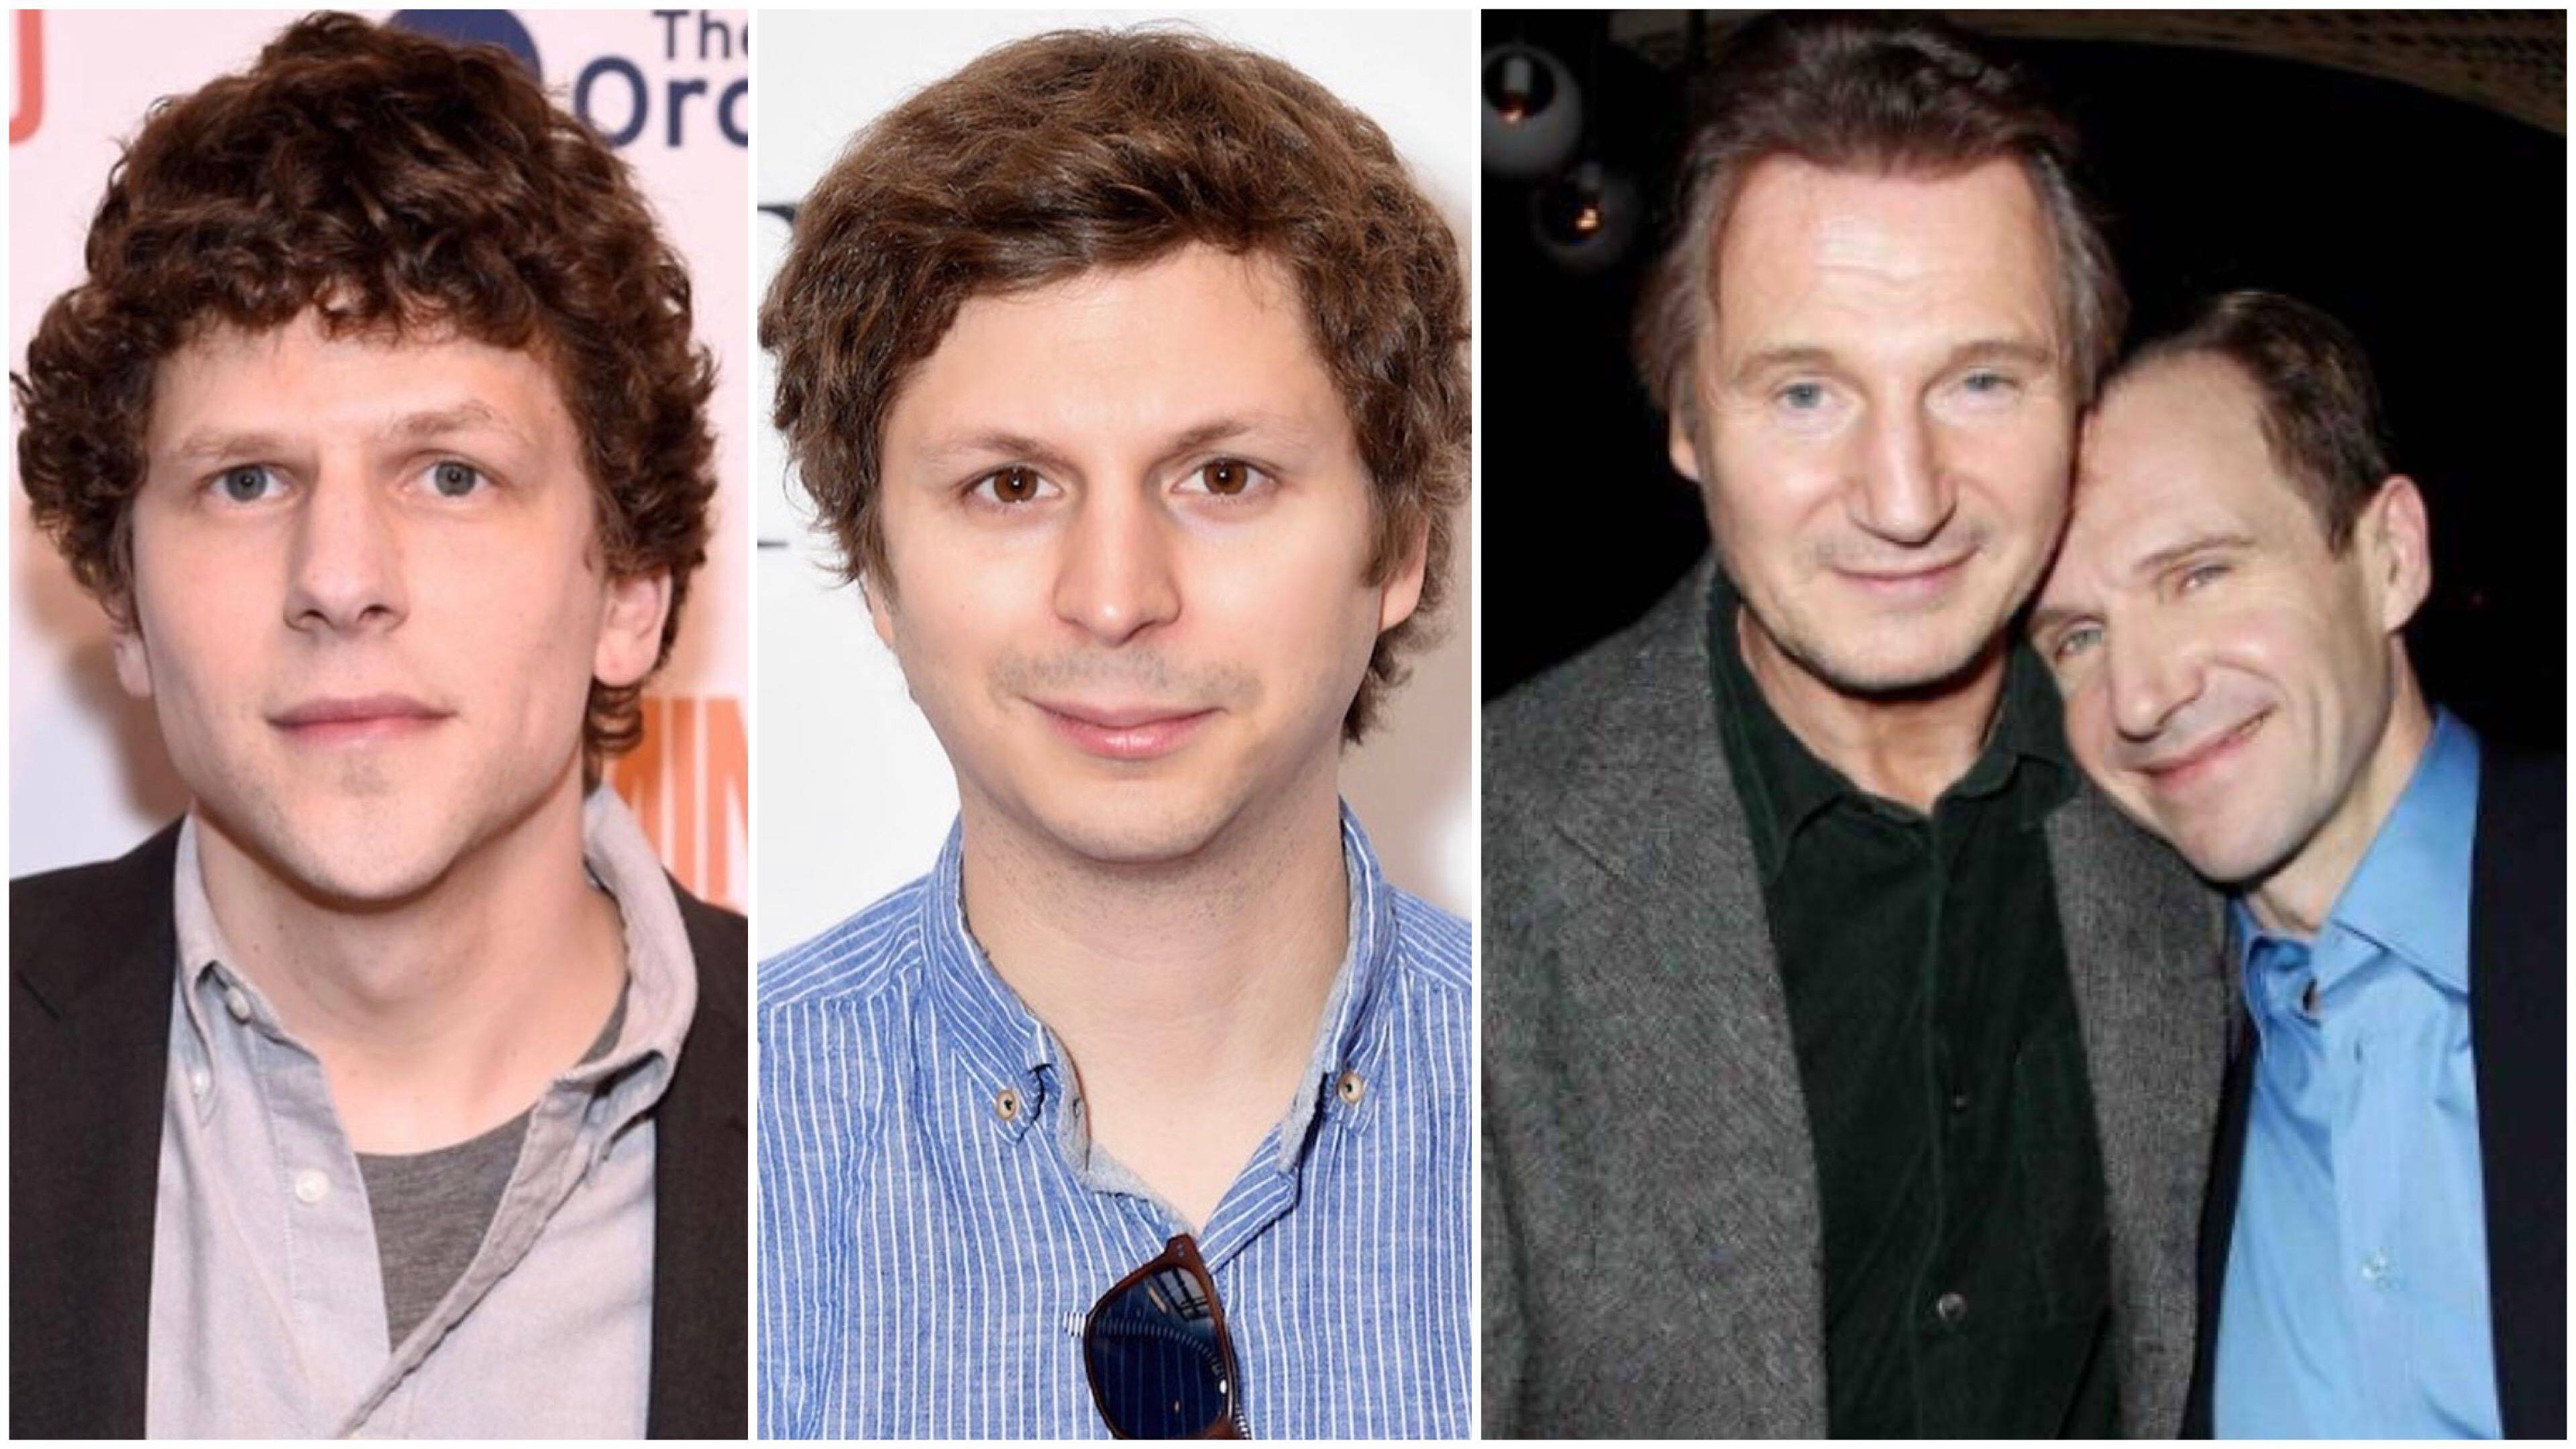 Meet these pairs of male celebrities who could easily be brothers, from Jesse Eisenberg and Michael Cera, to Liam Neeson and Ralph Fiennes. Photos: @jesseeisenbergunofficial, @michaelcerasource/Instagram; @MarinaIsabel13/Twitter